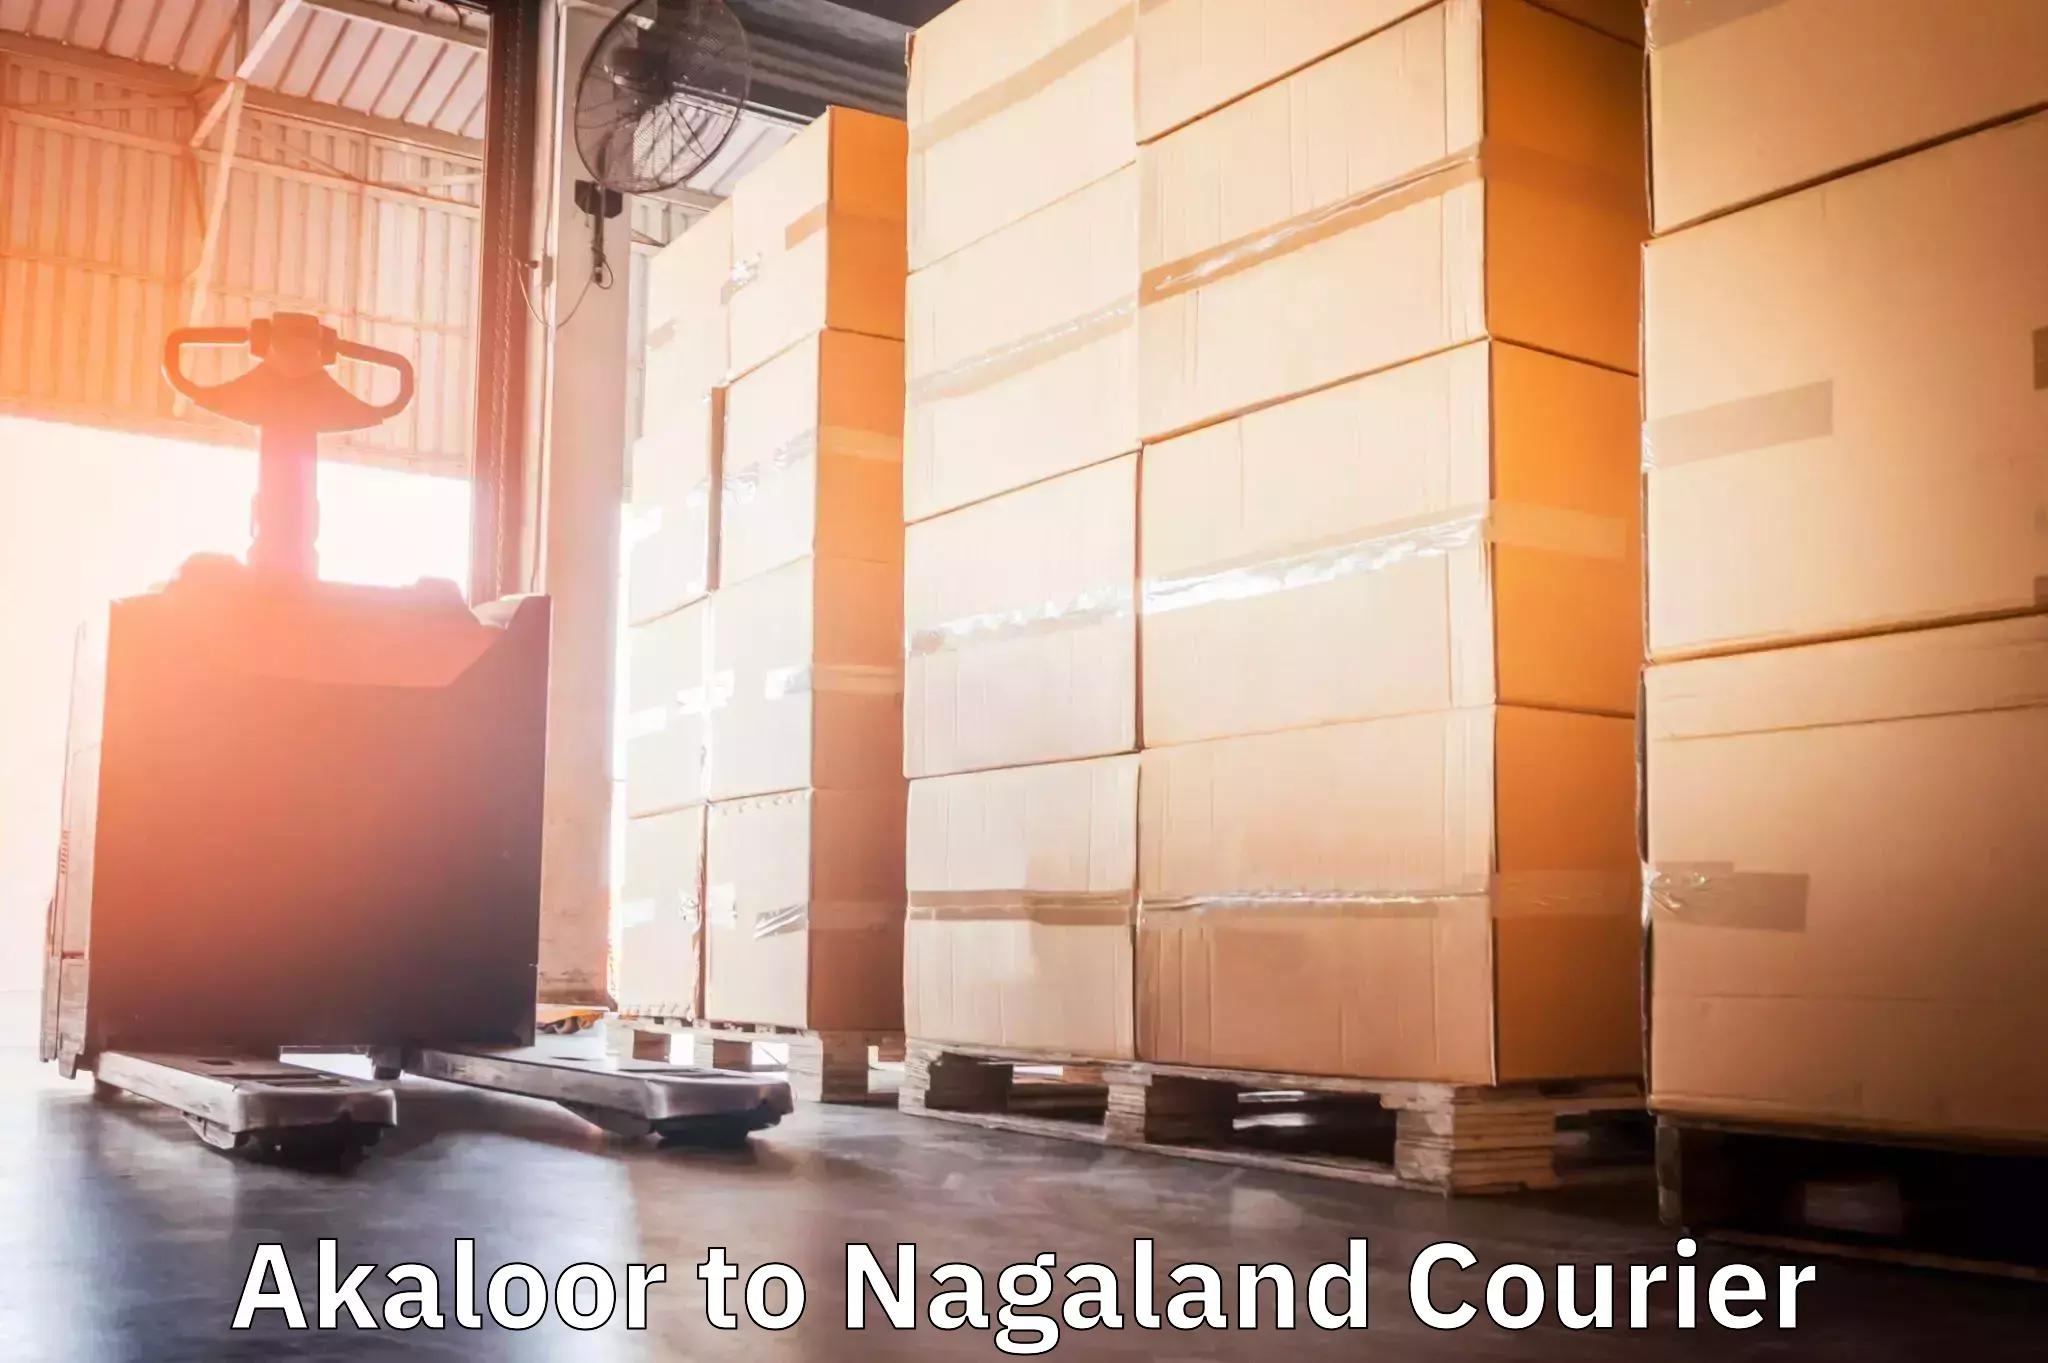 User-friendly courier app Akaloor to Nagaland